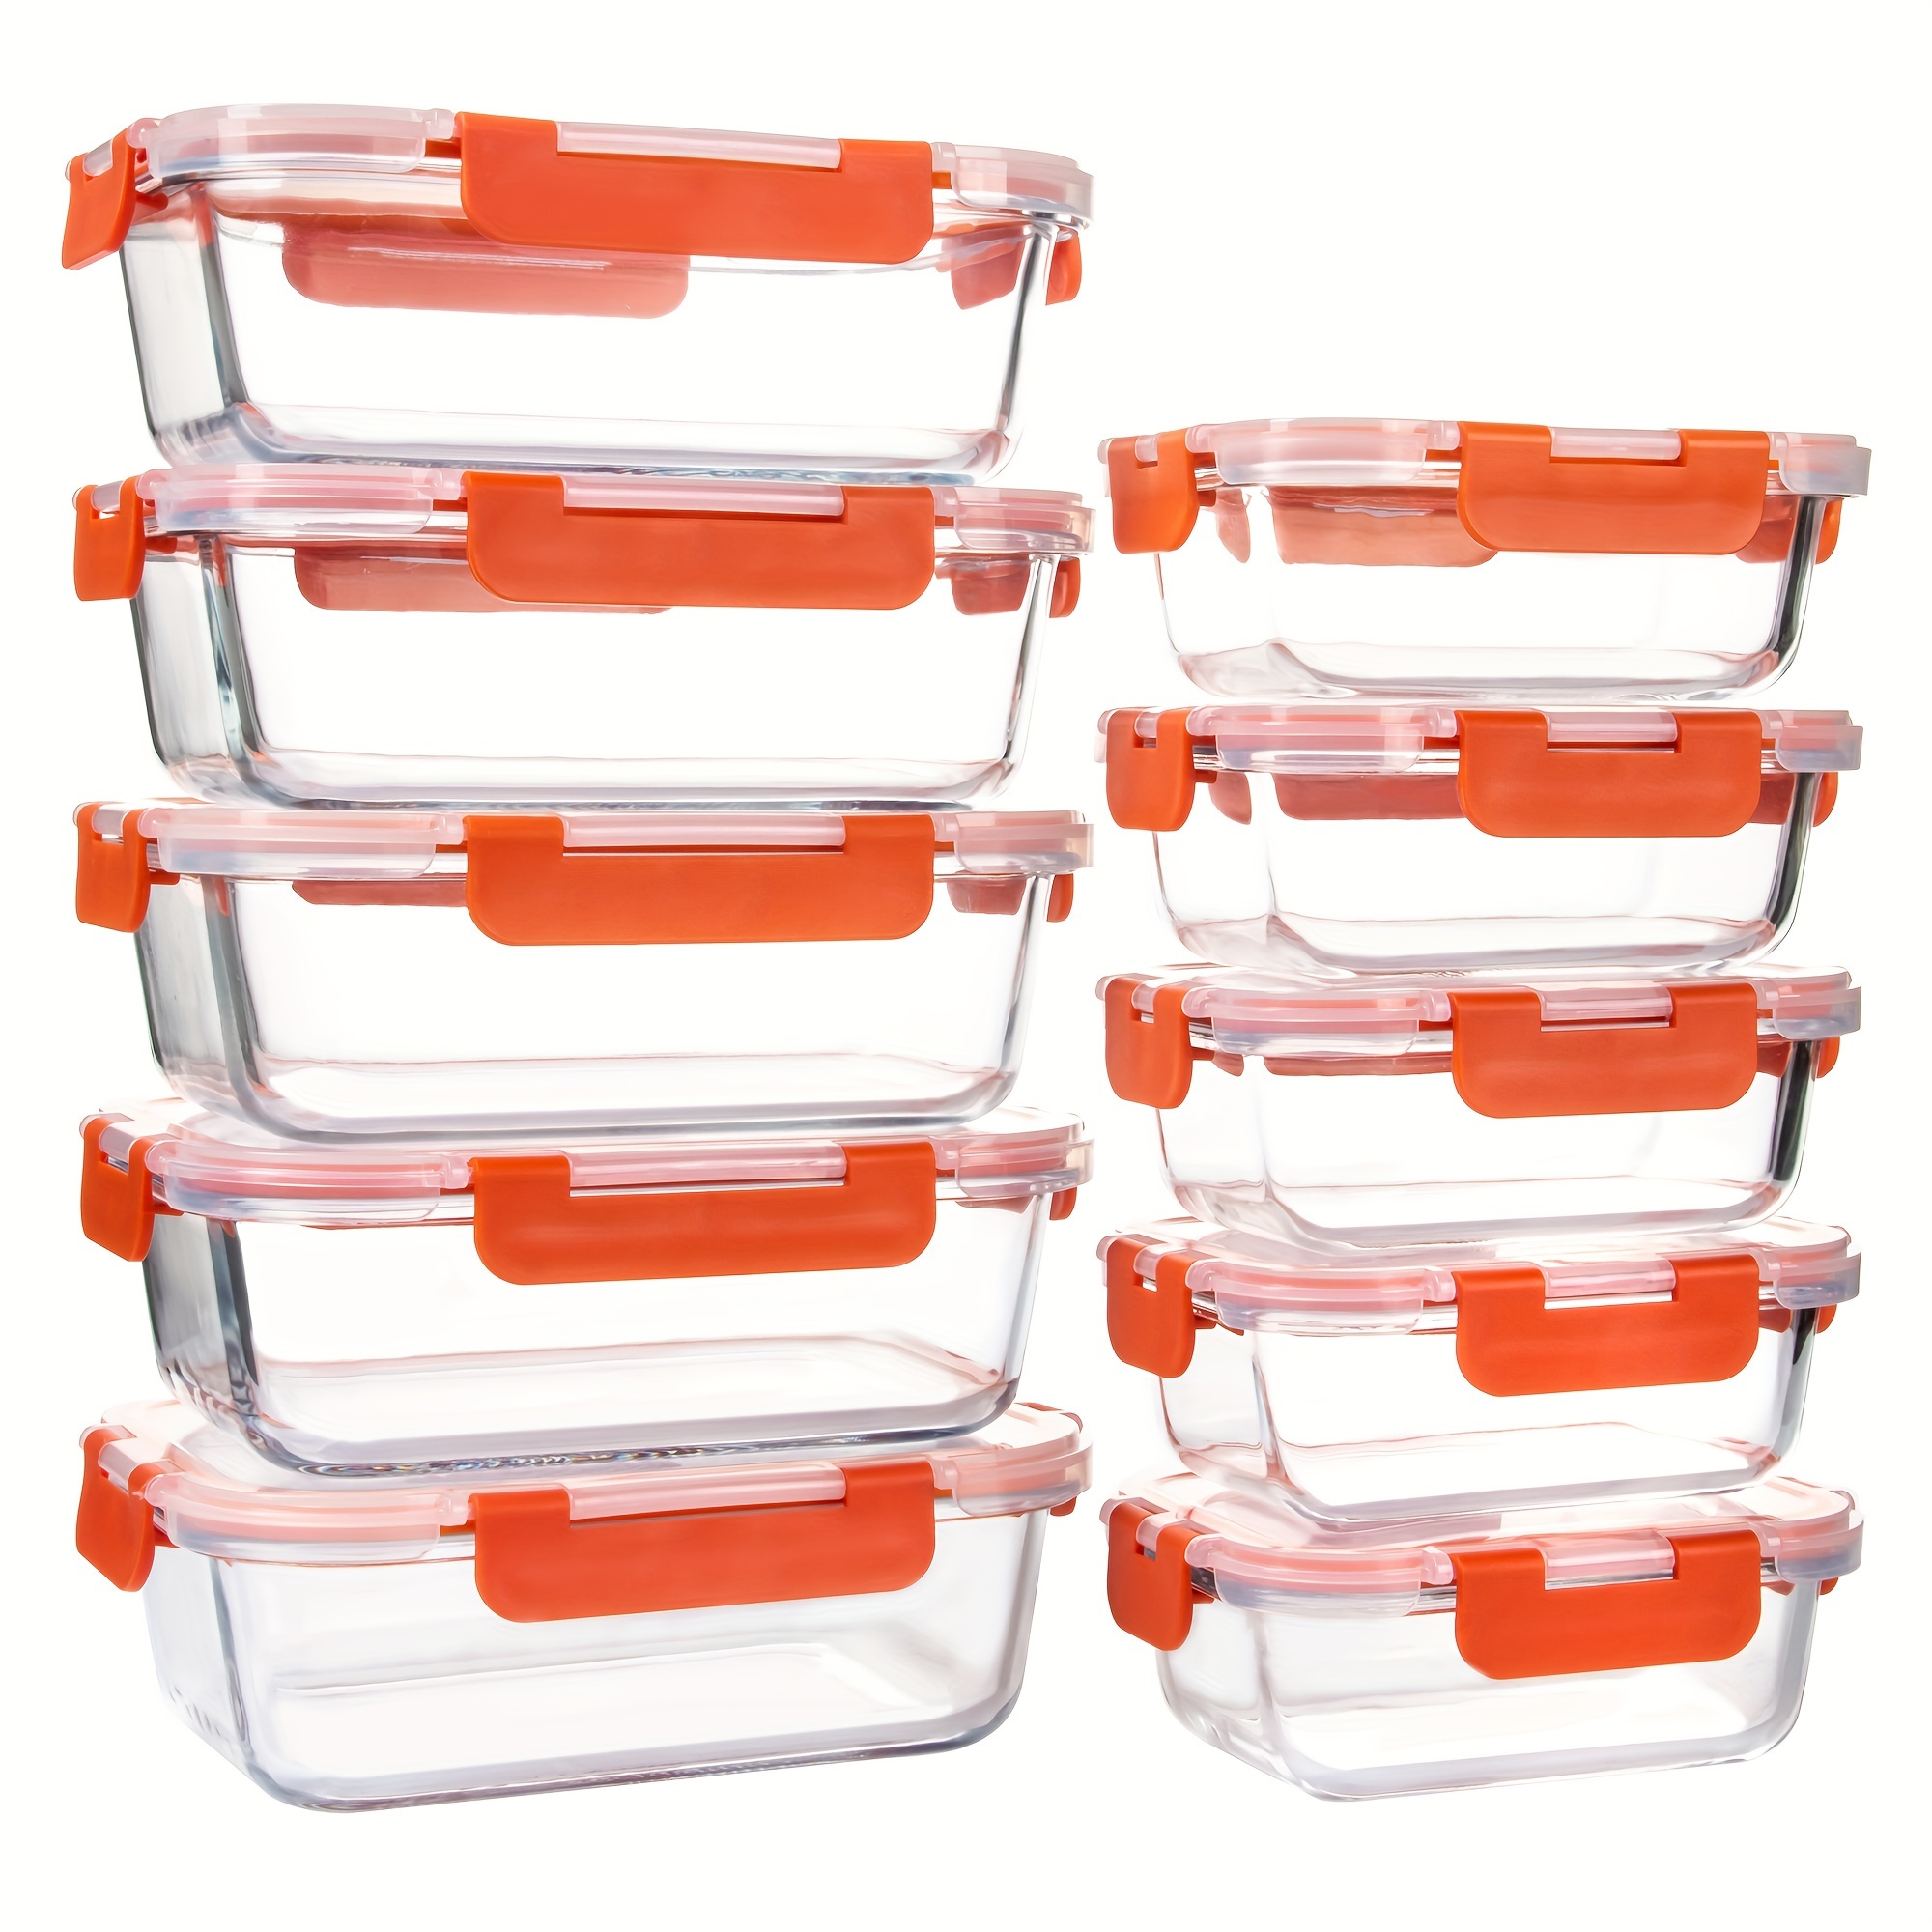 

10 Pack Glass Containers For Food Storage With Lids, Glass Meal Prep Containers For Kitchen, Home Use, Orange/mint/pink